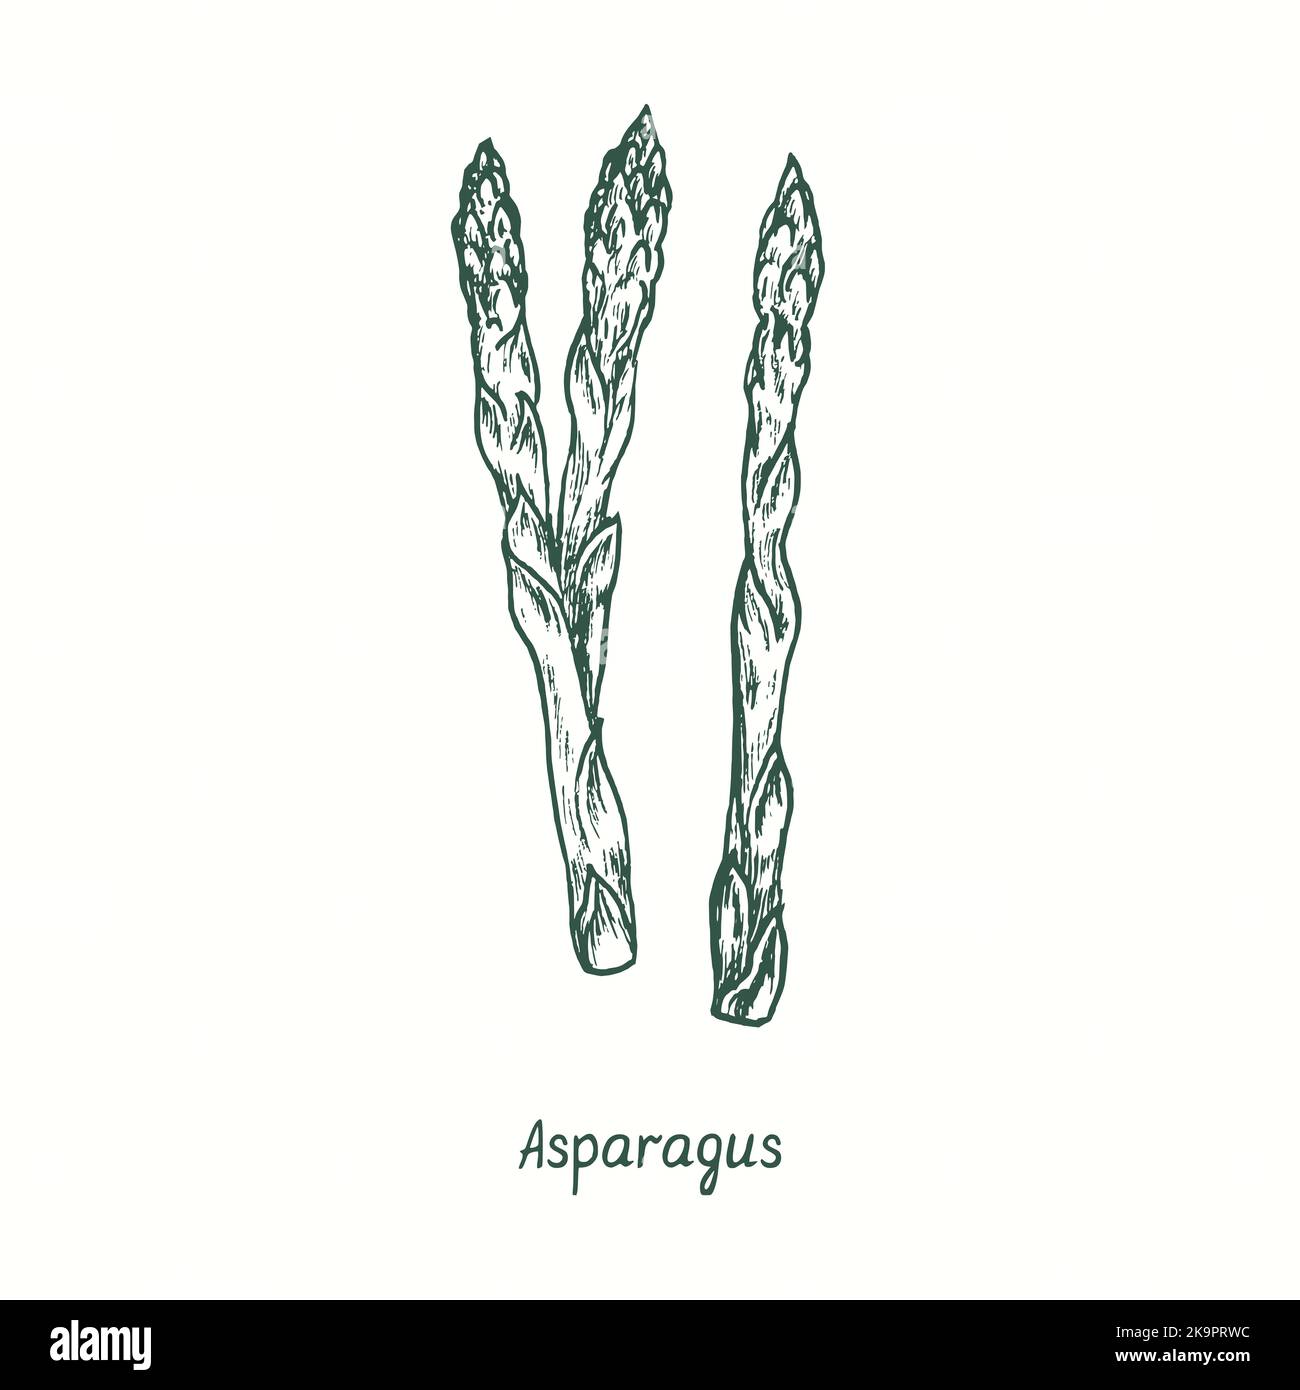 Asparagus.  Ink black and white doodle drawing in woodcut style Stock Photo